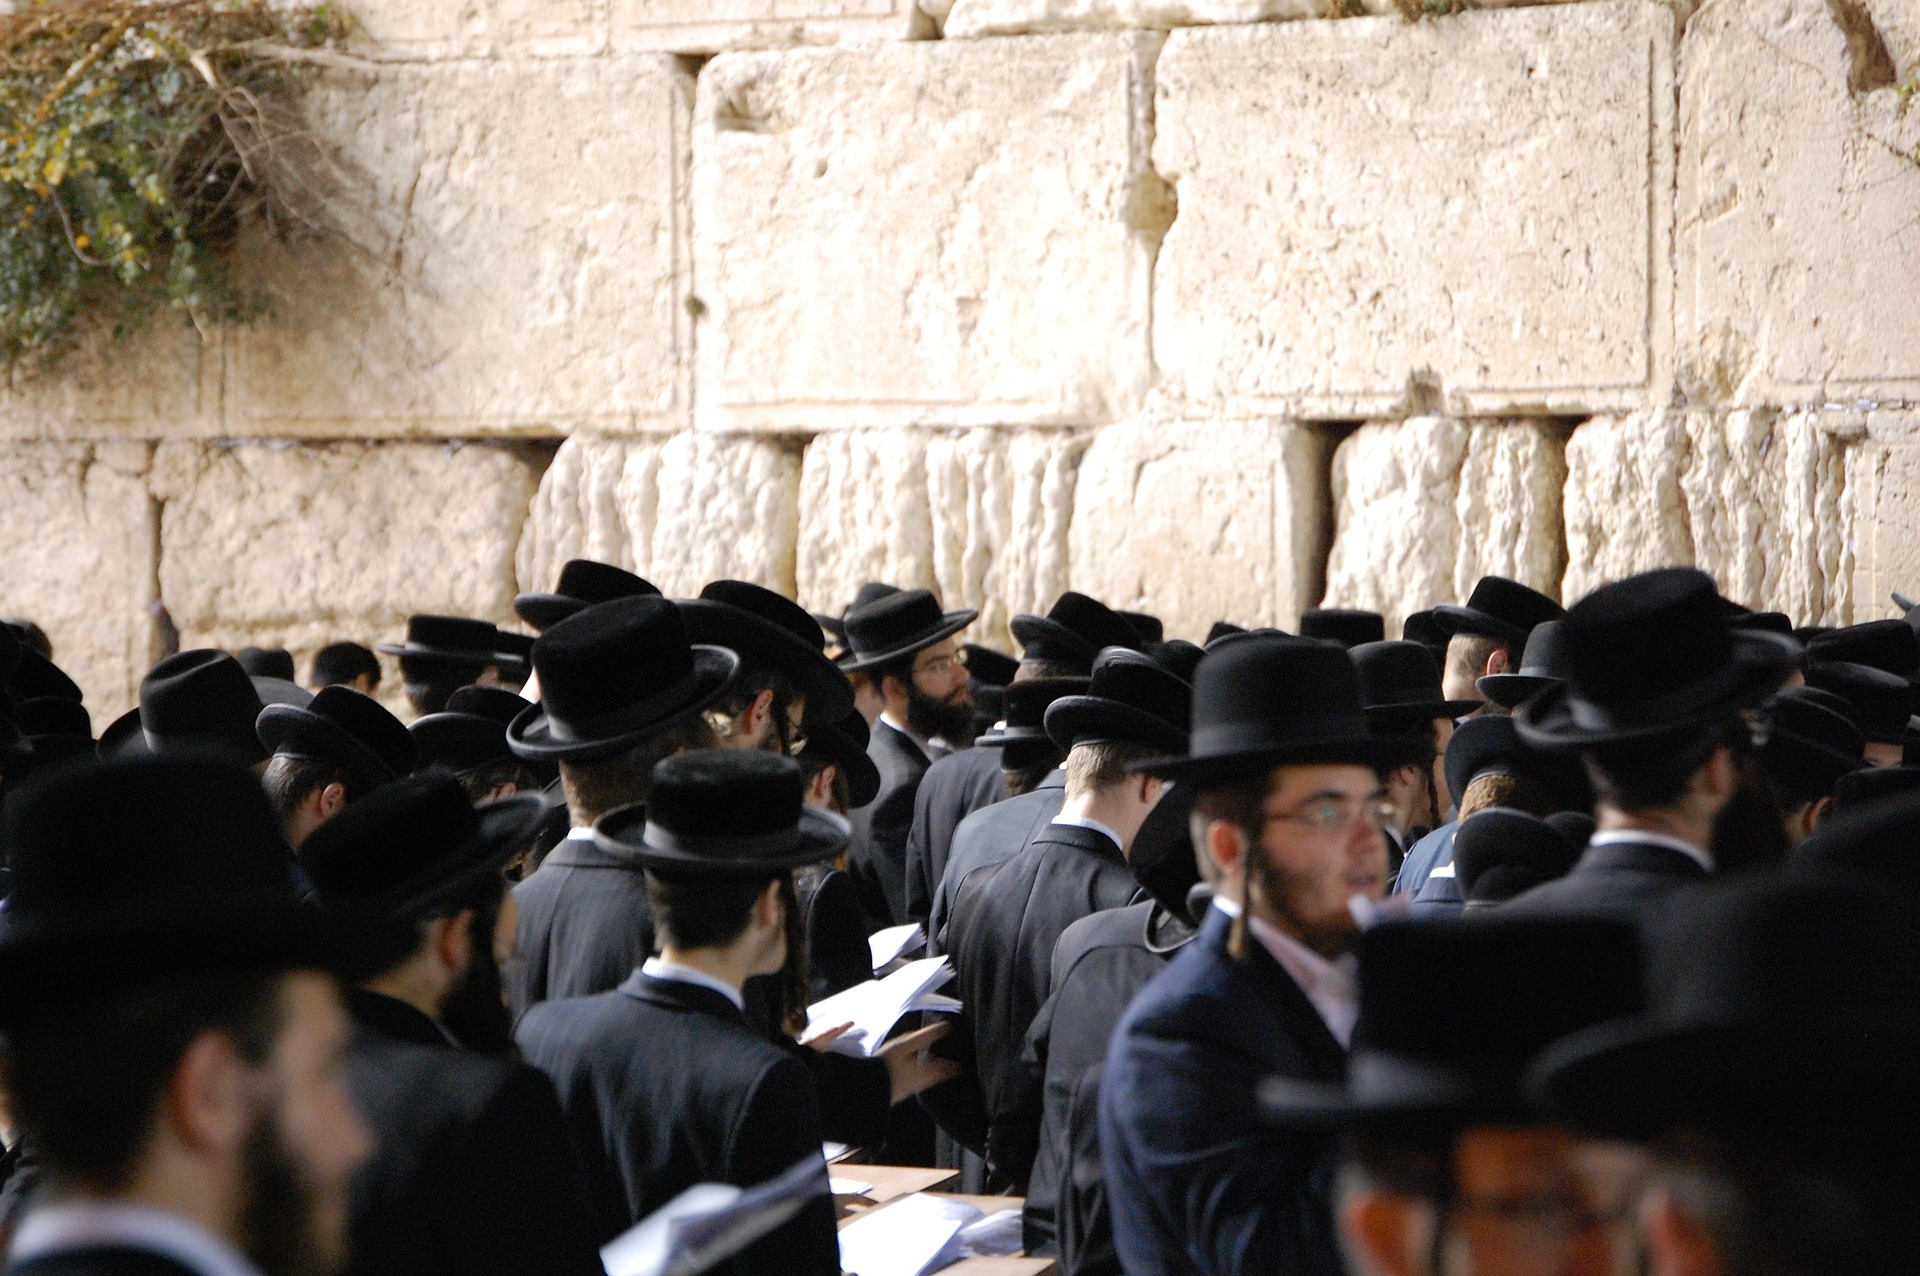 The Evolution of the Jewish People in their Homeland and the Diaspora